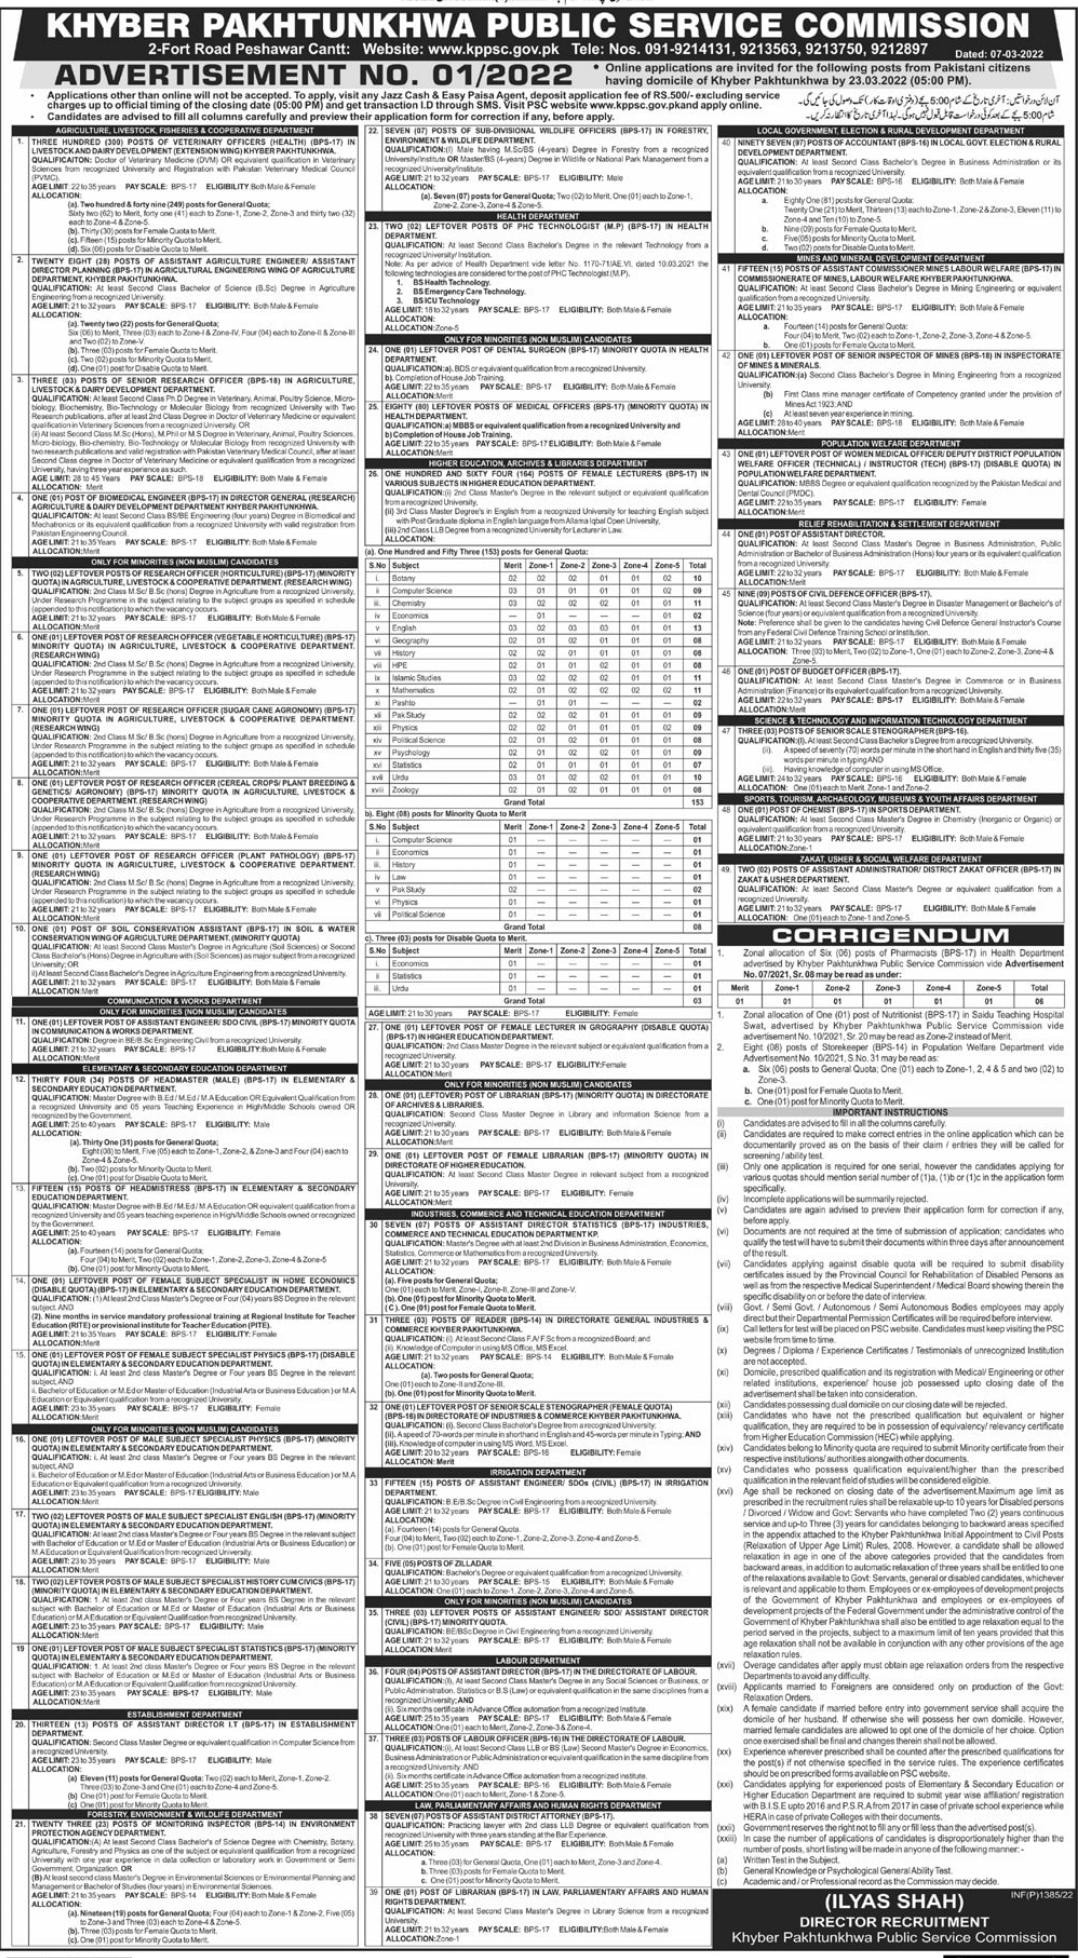 KPPSC Jobs March 2022 for Teachers and Many Others